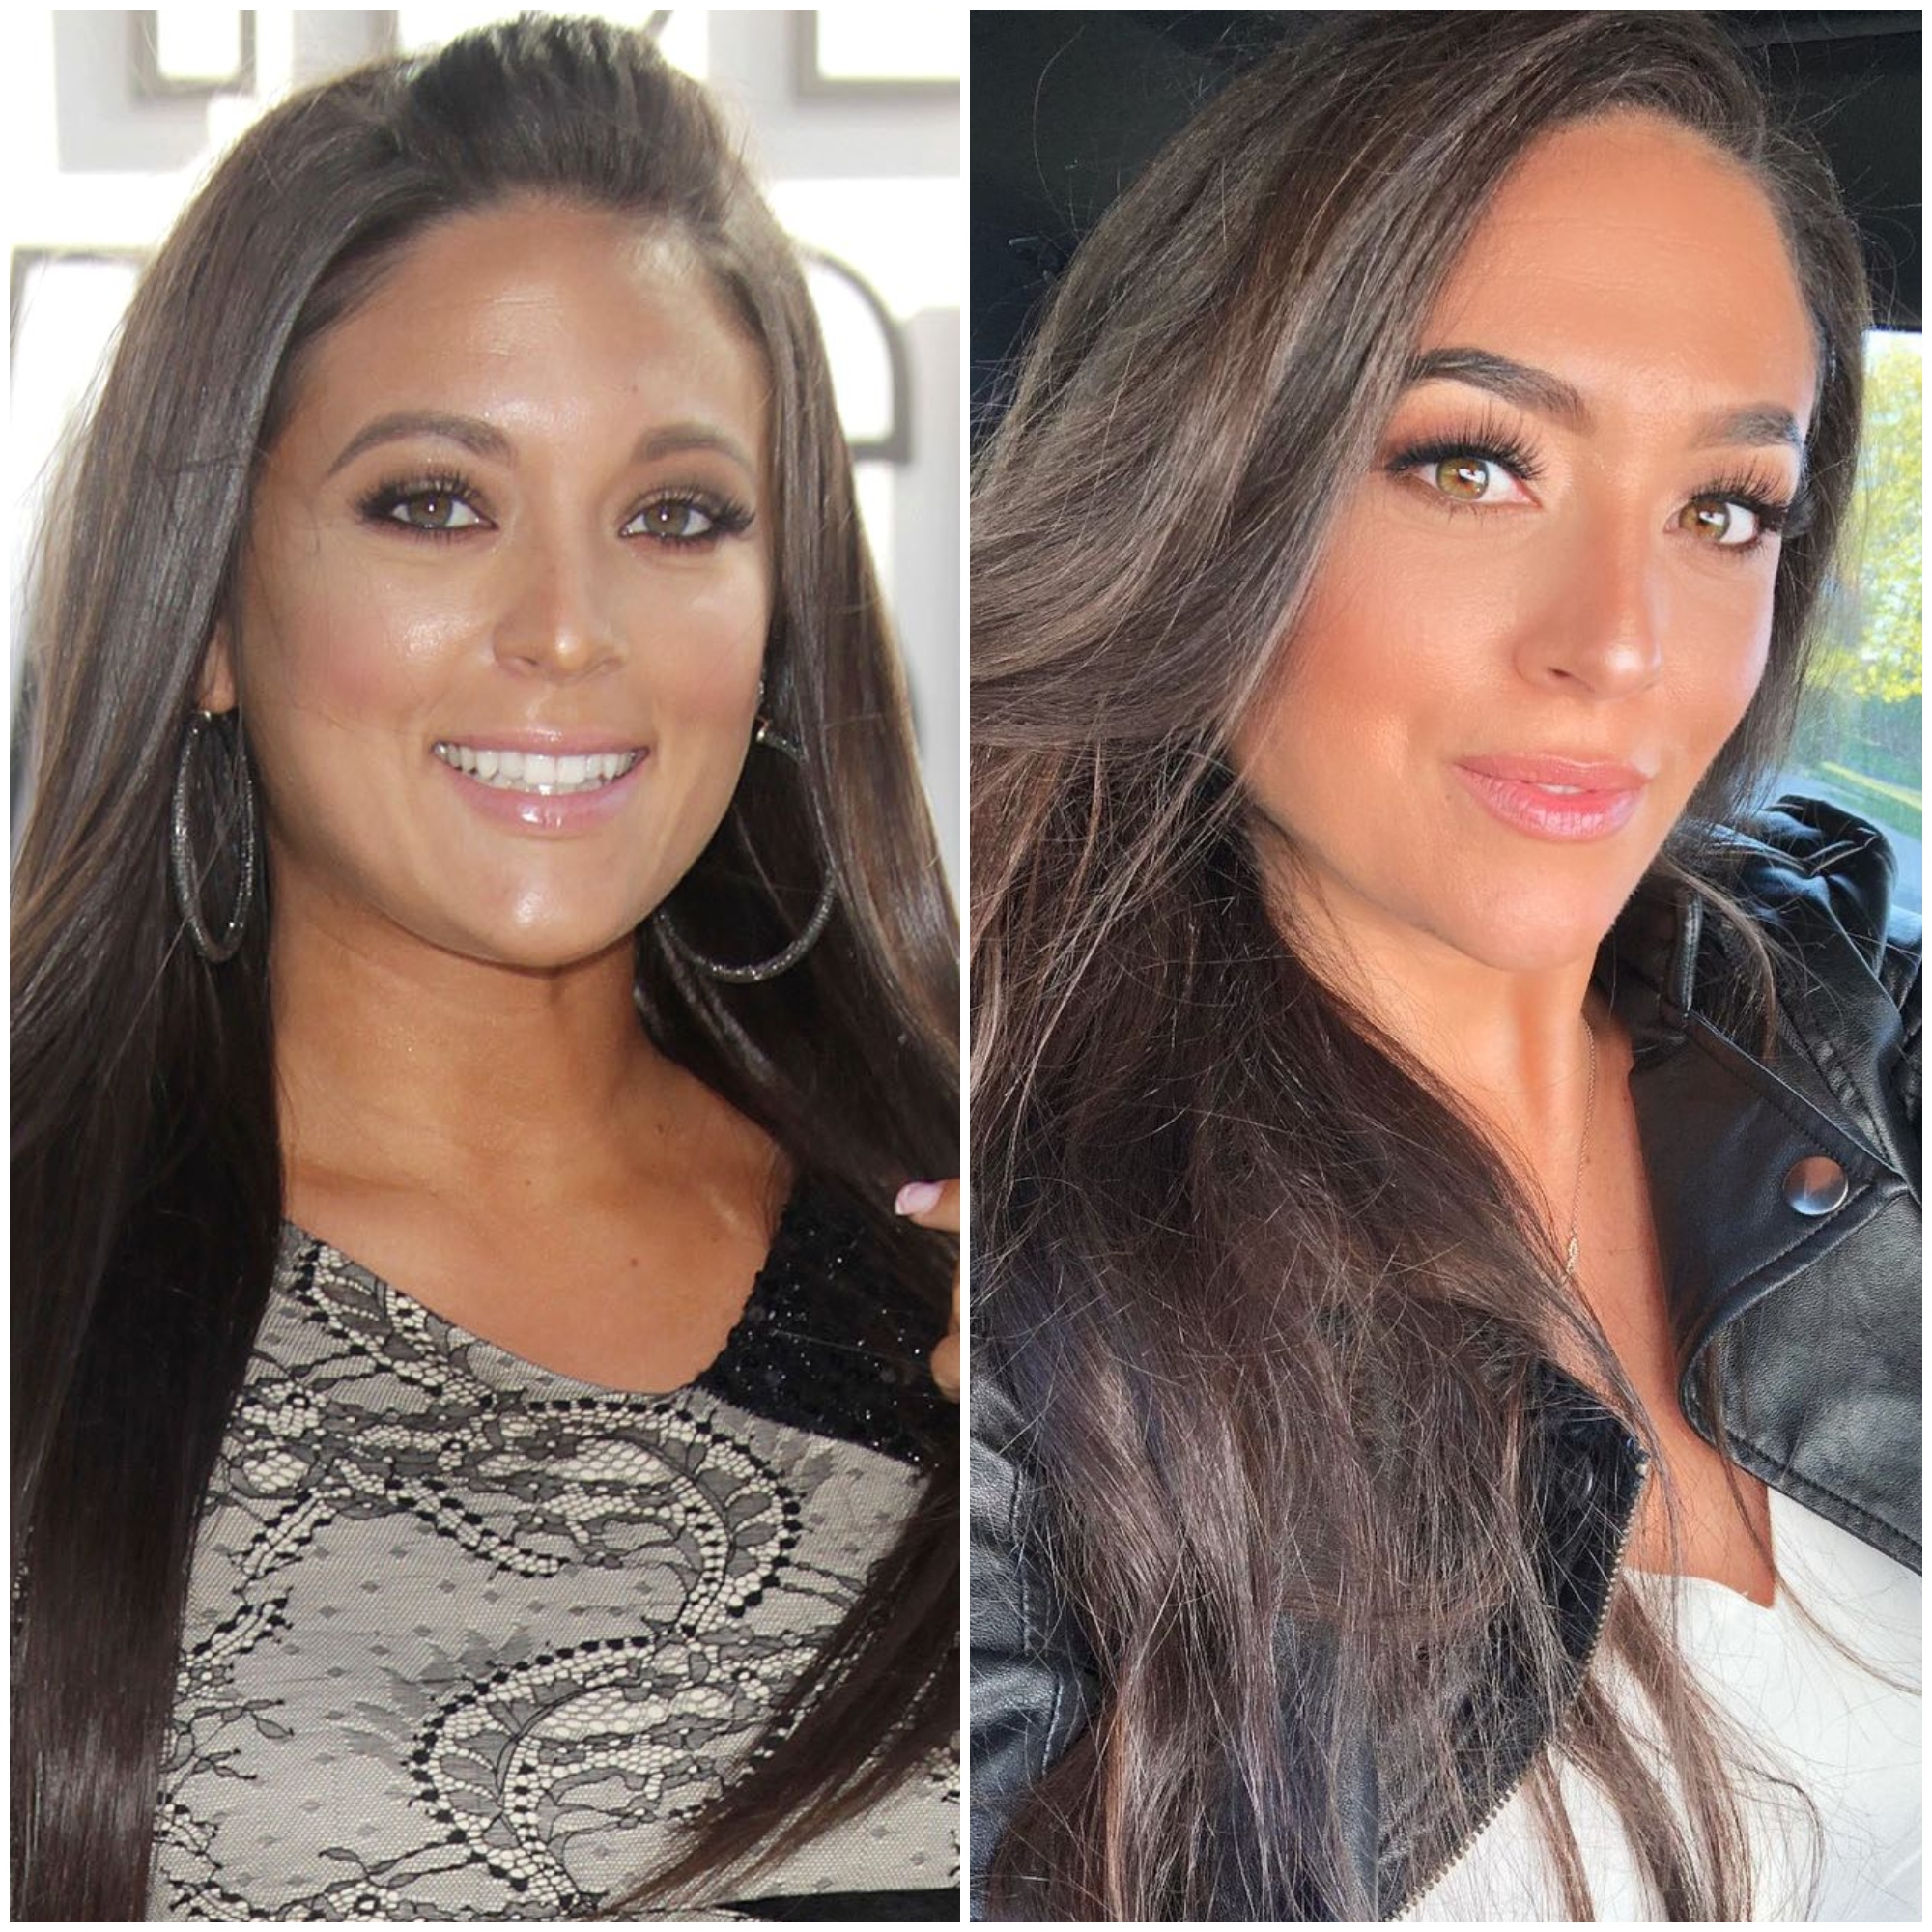 Sammi 'Sweetheart' From 'Jersey Shore' Then vs. Now: Photos